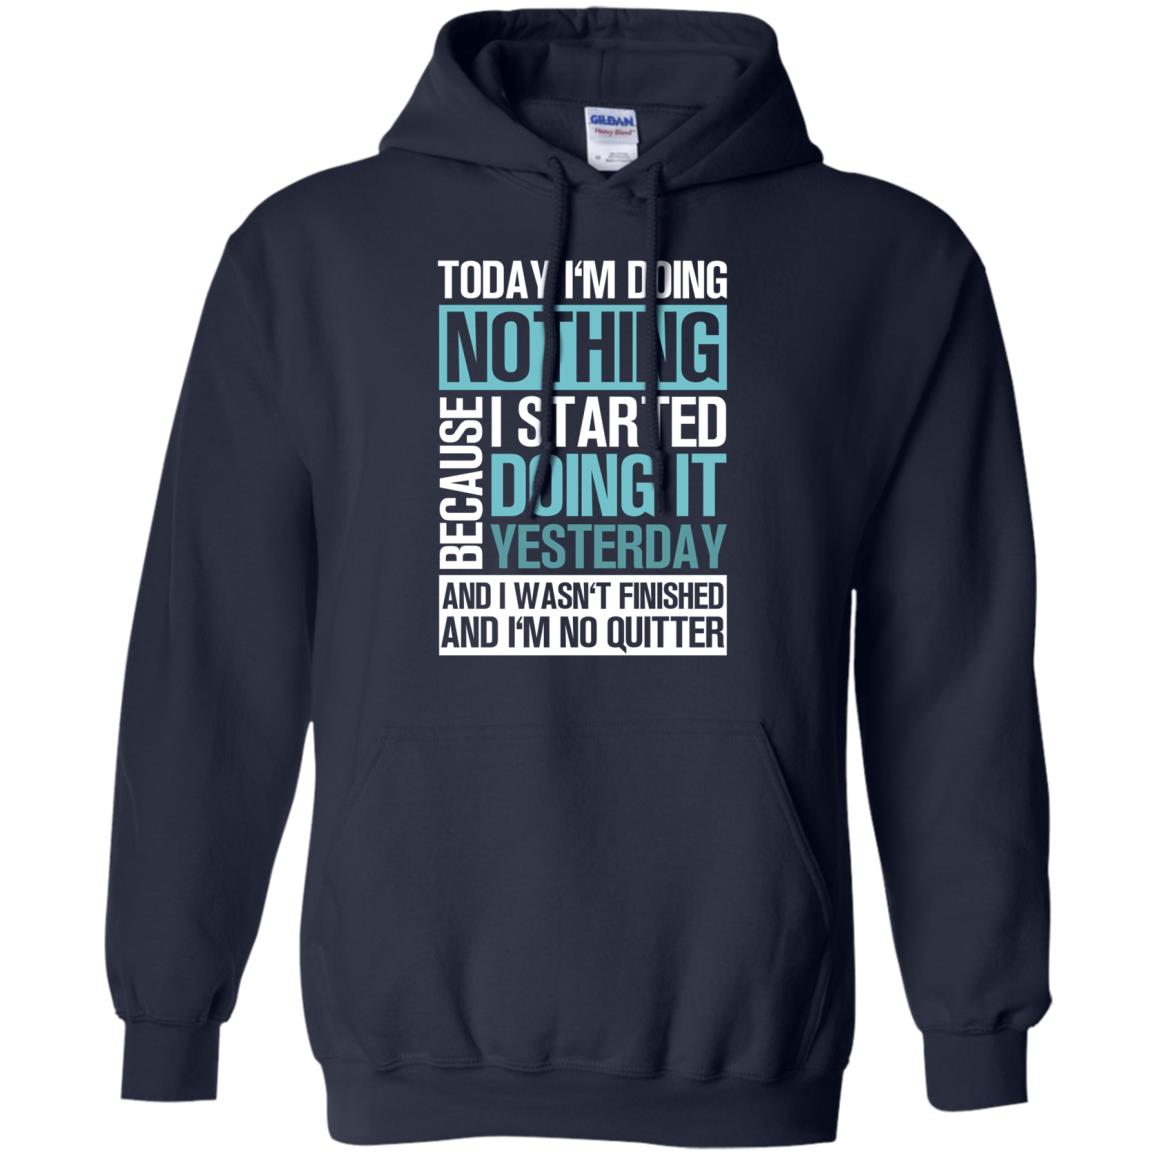 Today I'm Doing Nothing Because I Started Doing It Yeaterday And I Wasn't Finished And I'm Not Quitter ShirtG185 Gildan Pullover Hoodie 8 oz.